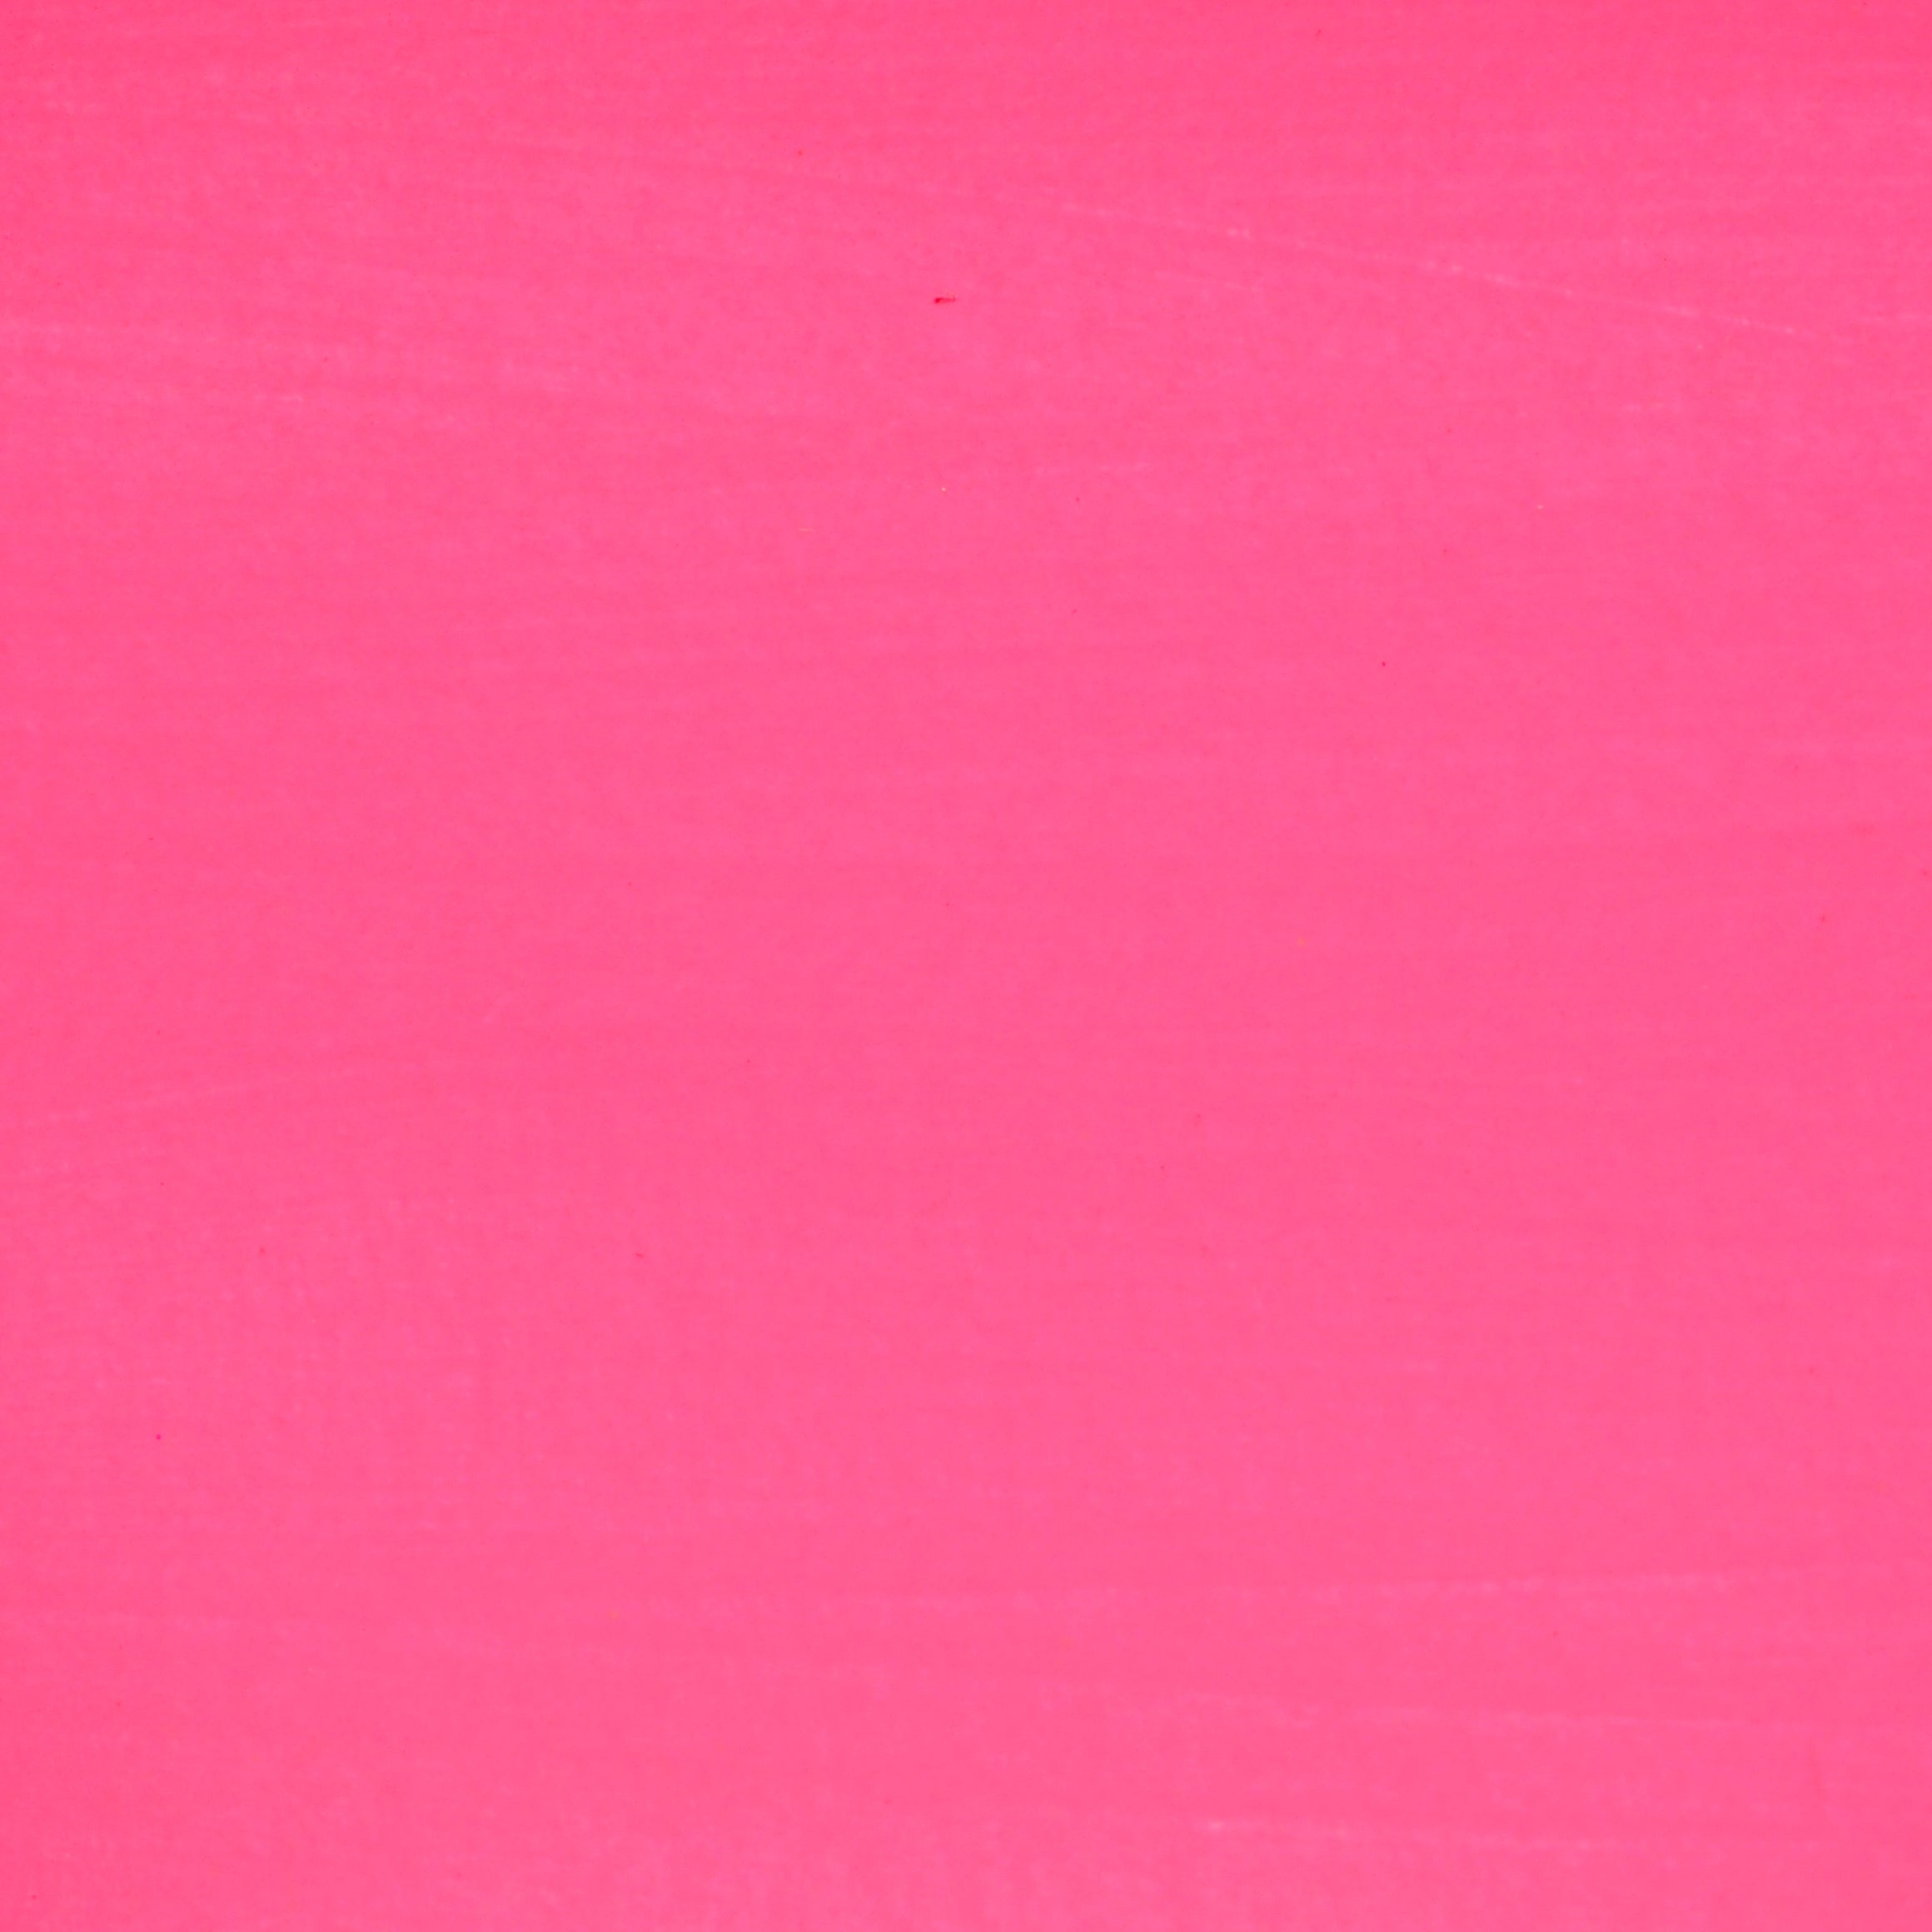 #colour_thrilling pink